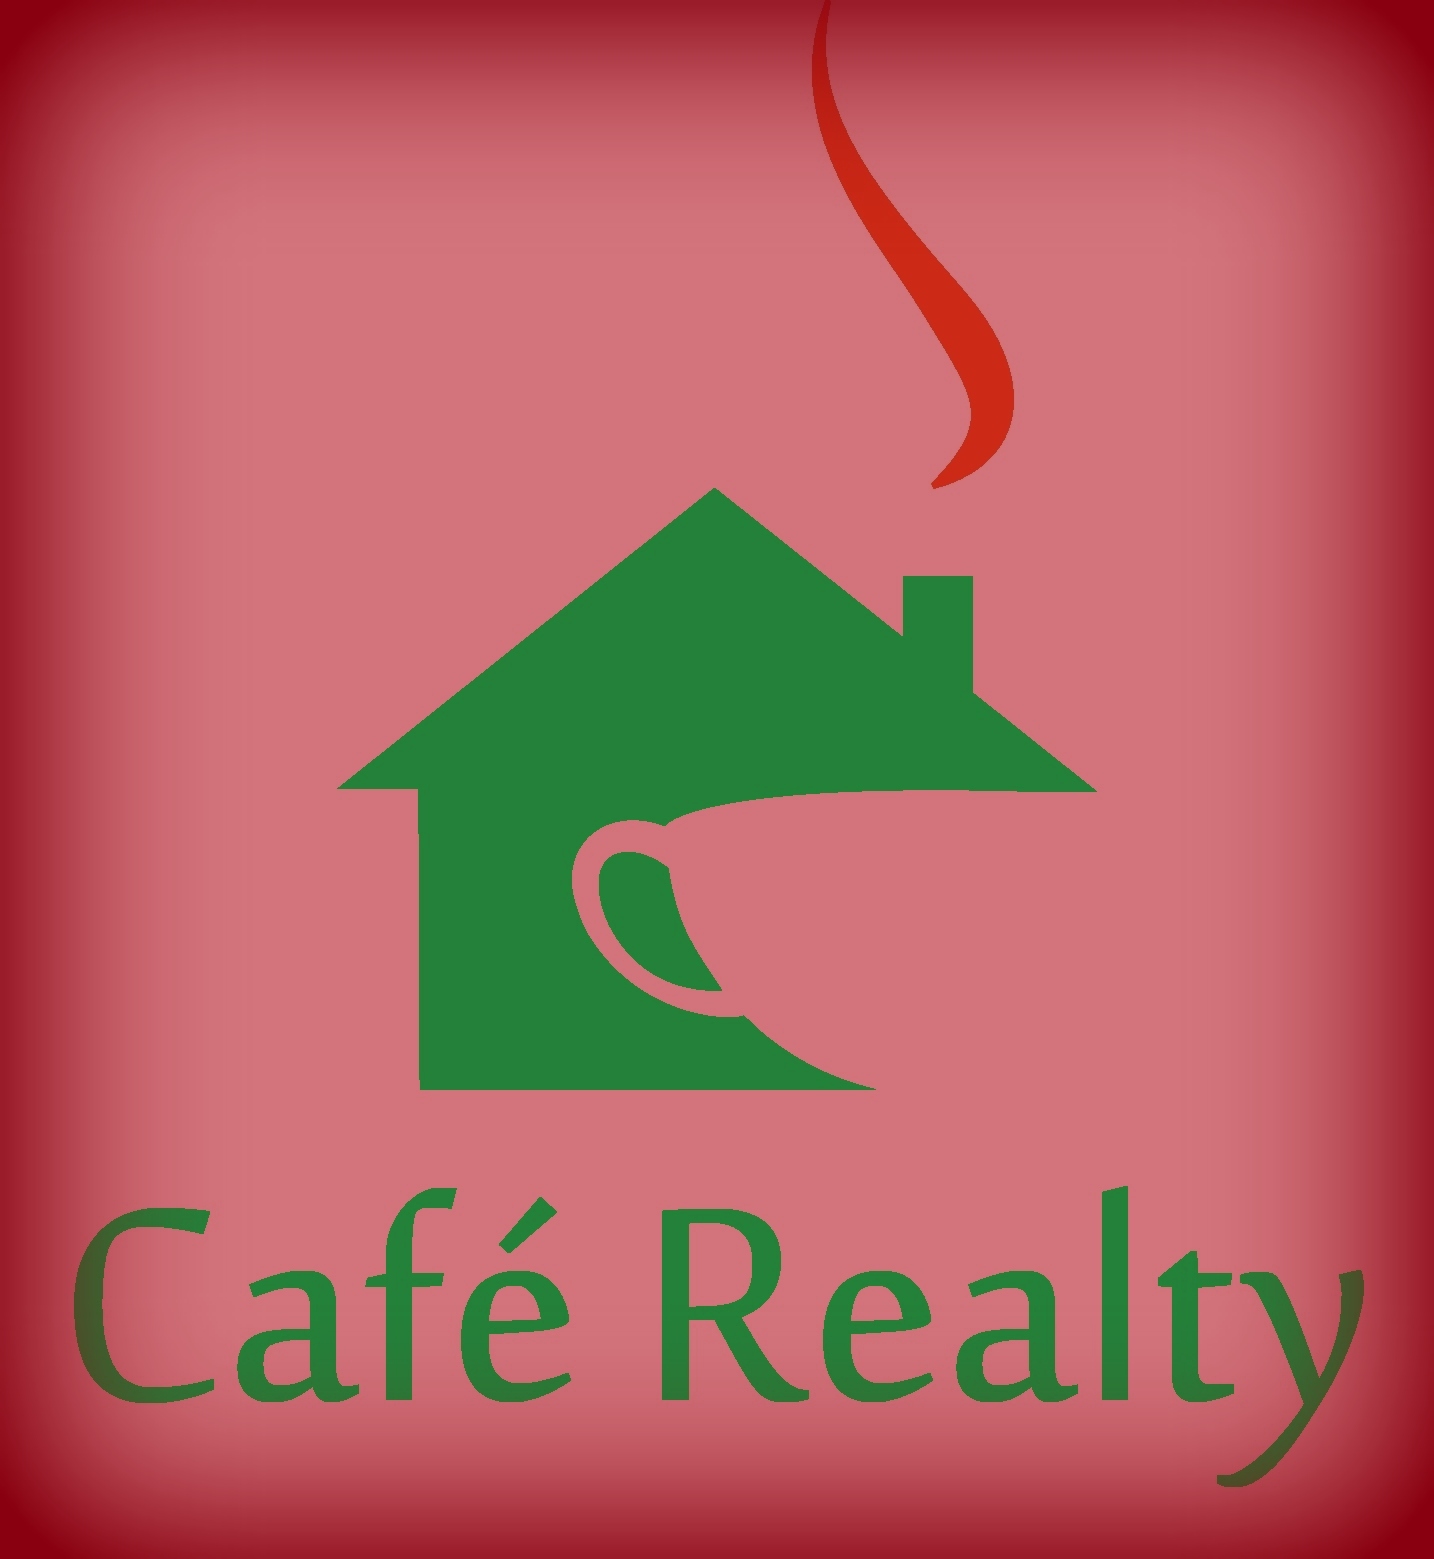 Cafe realty Christmas